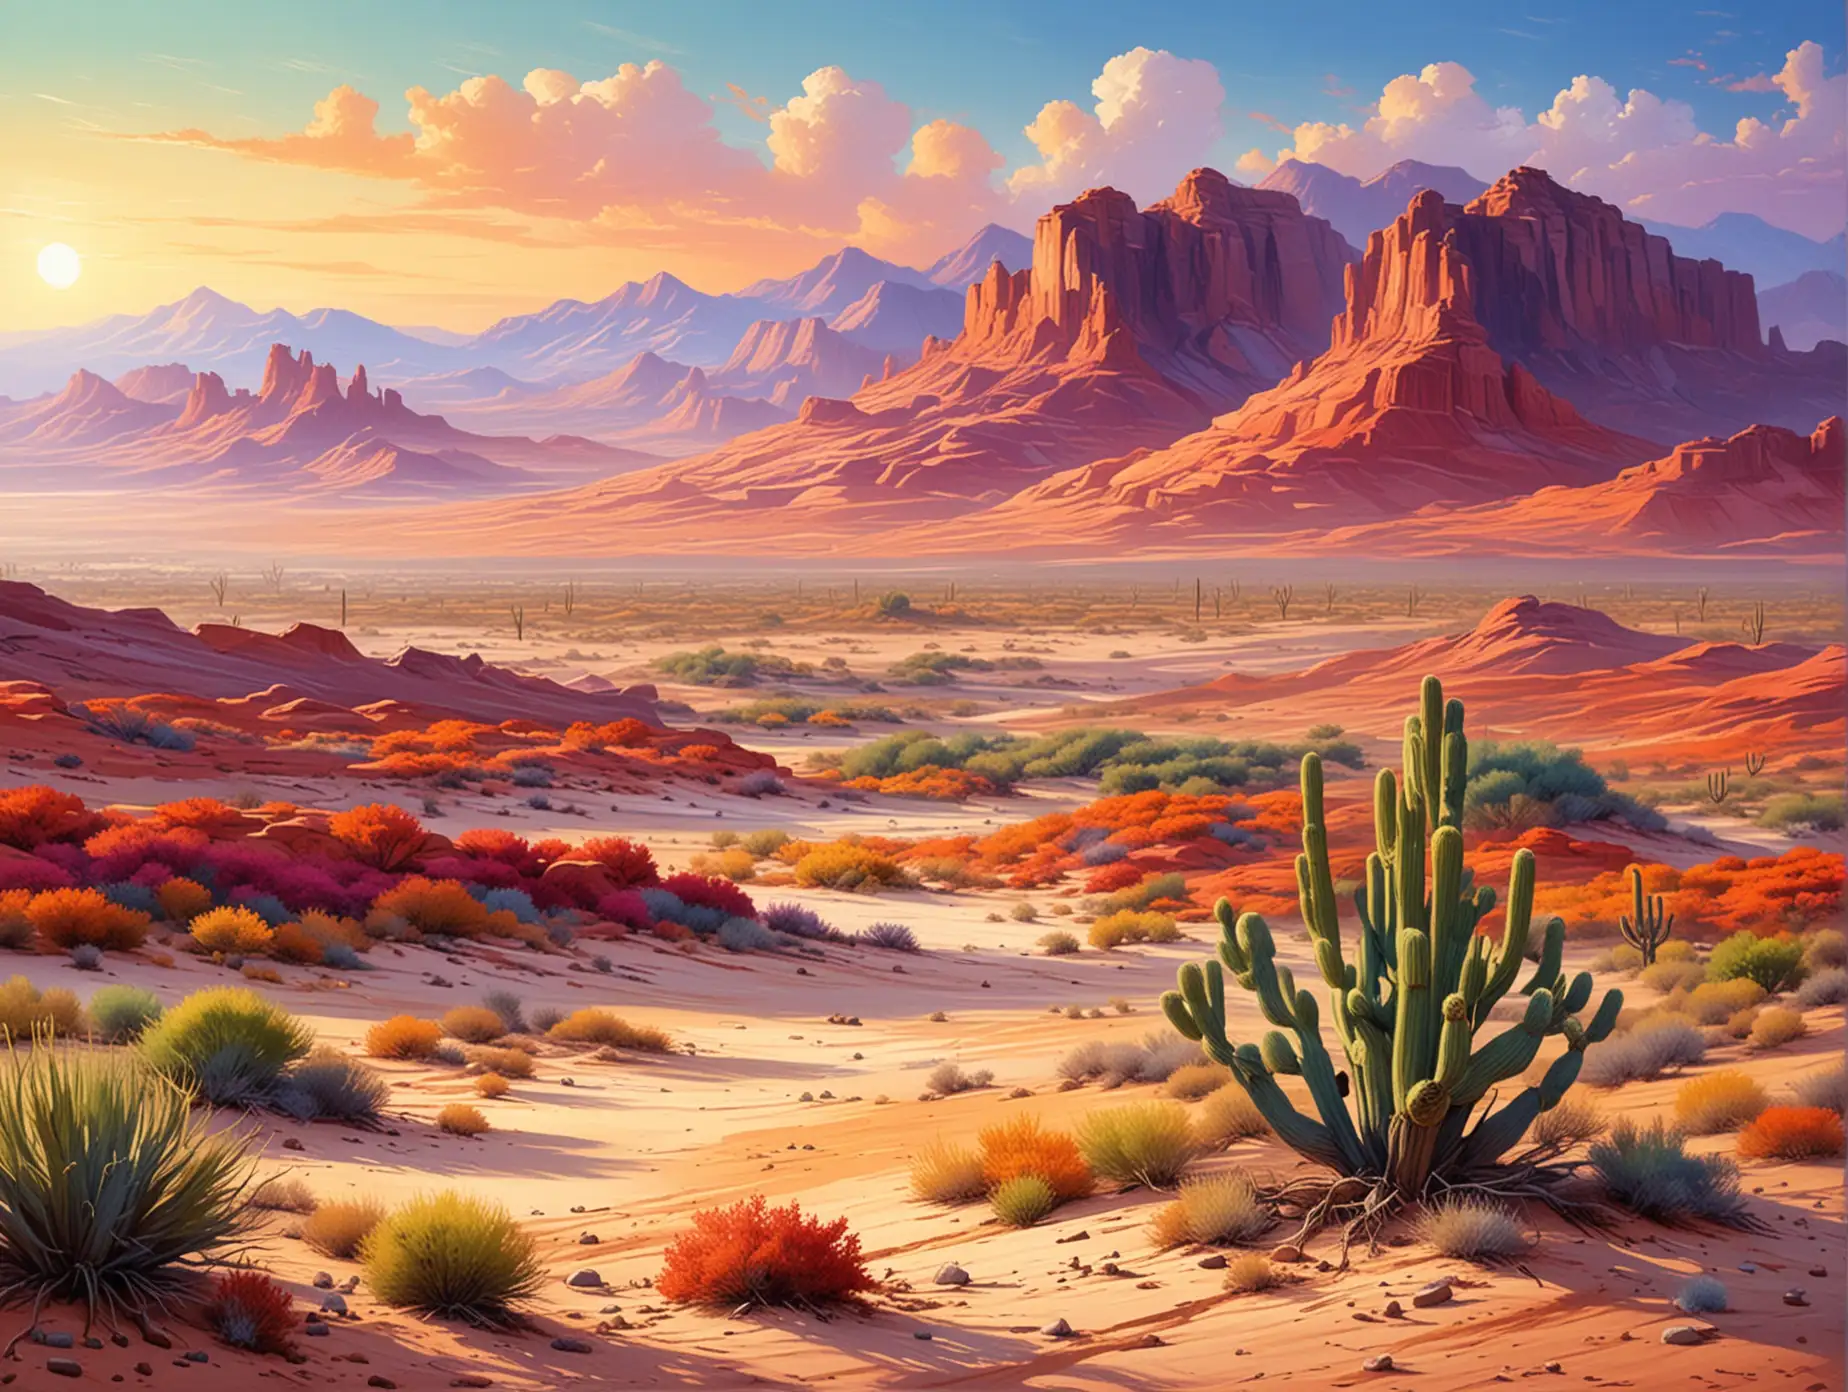 Vibrant Desert Landscape Painting with Diverse Flora and Fauna